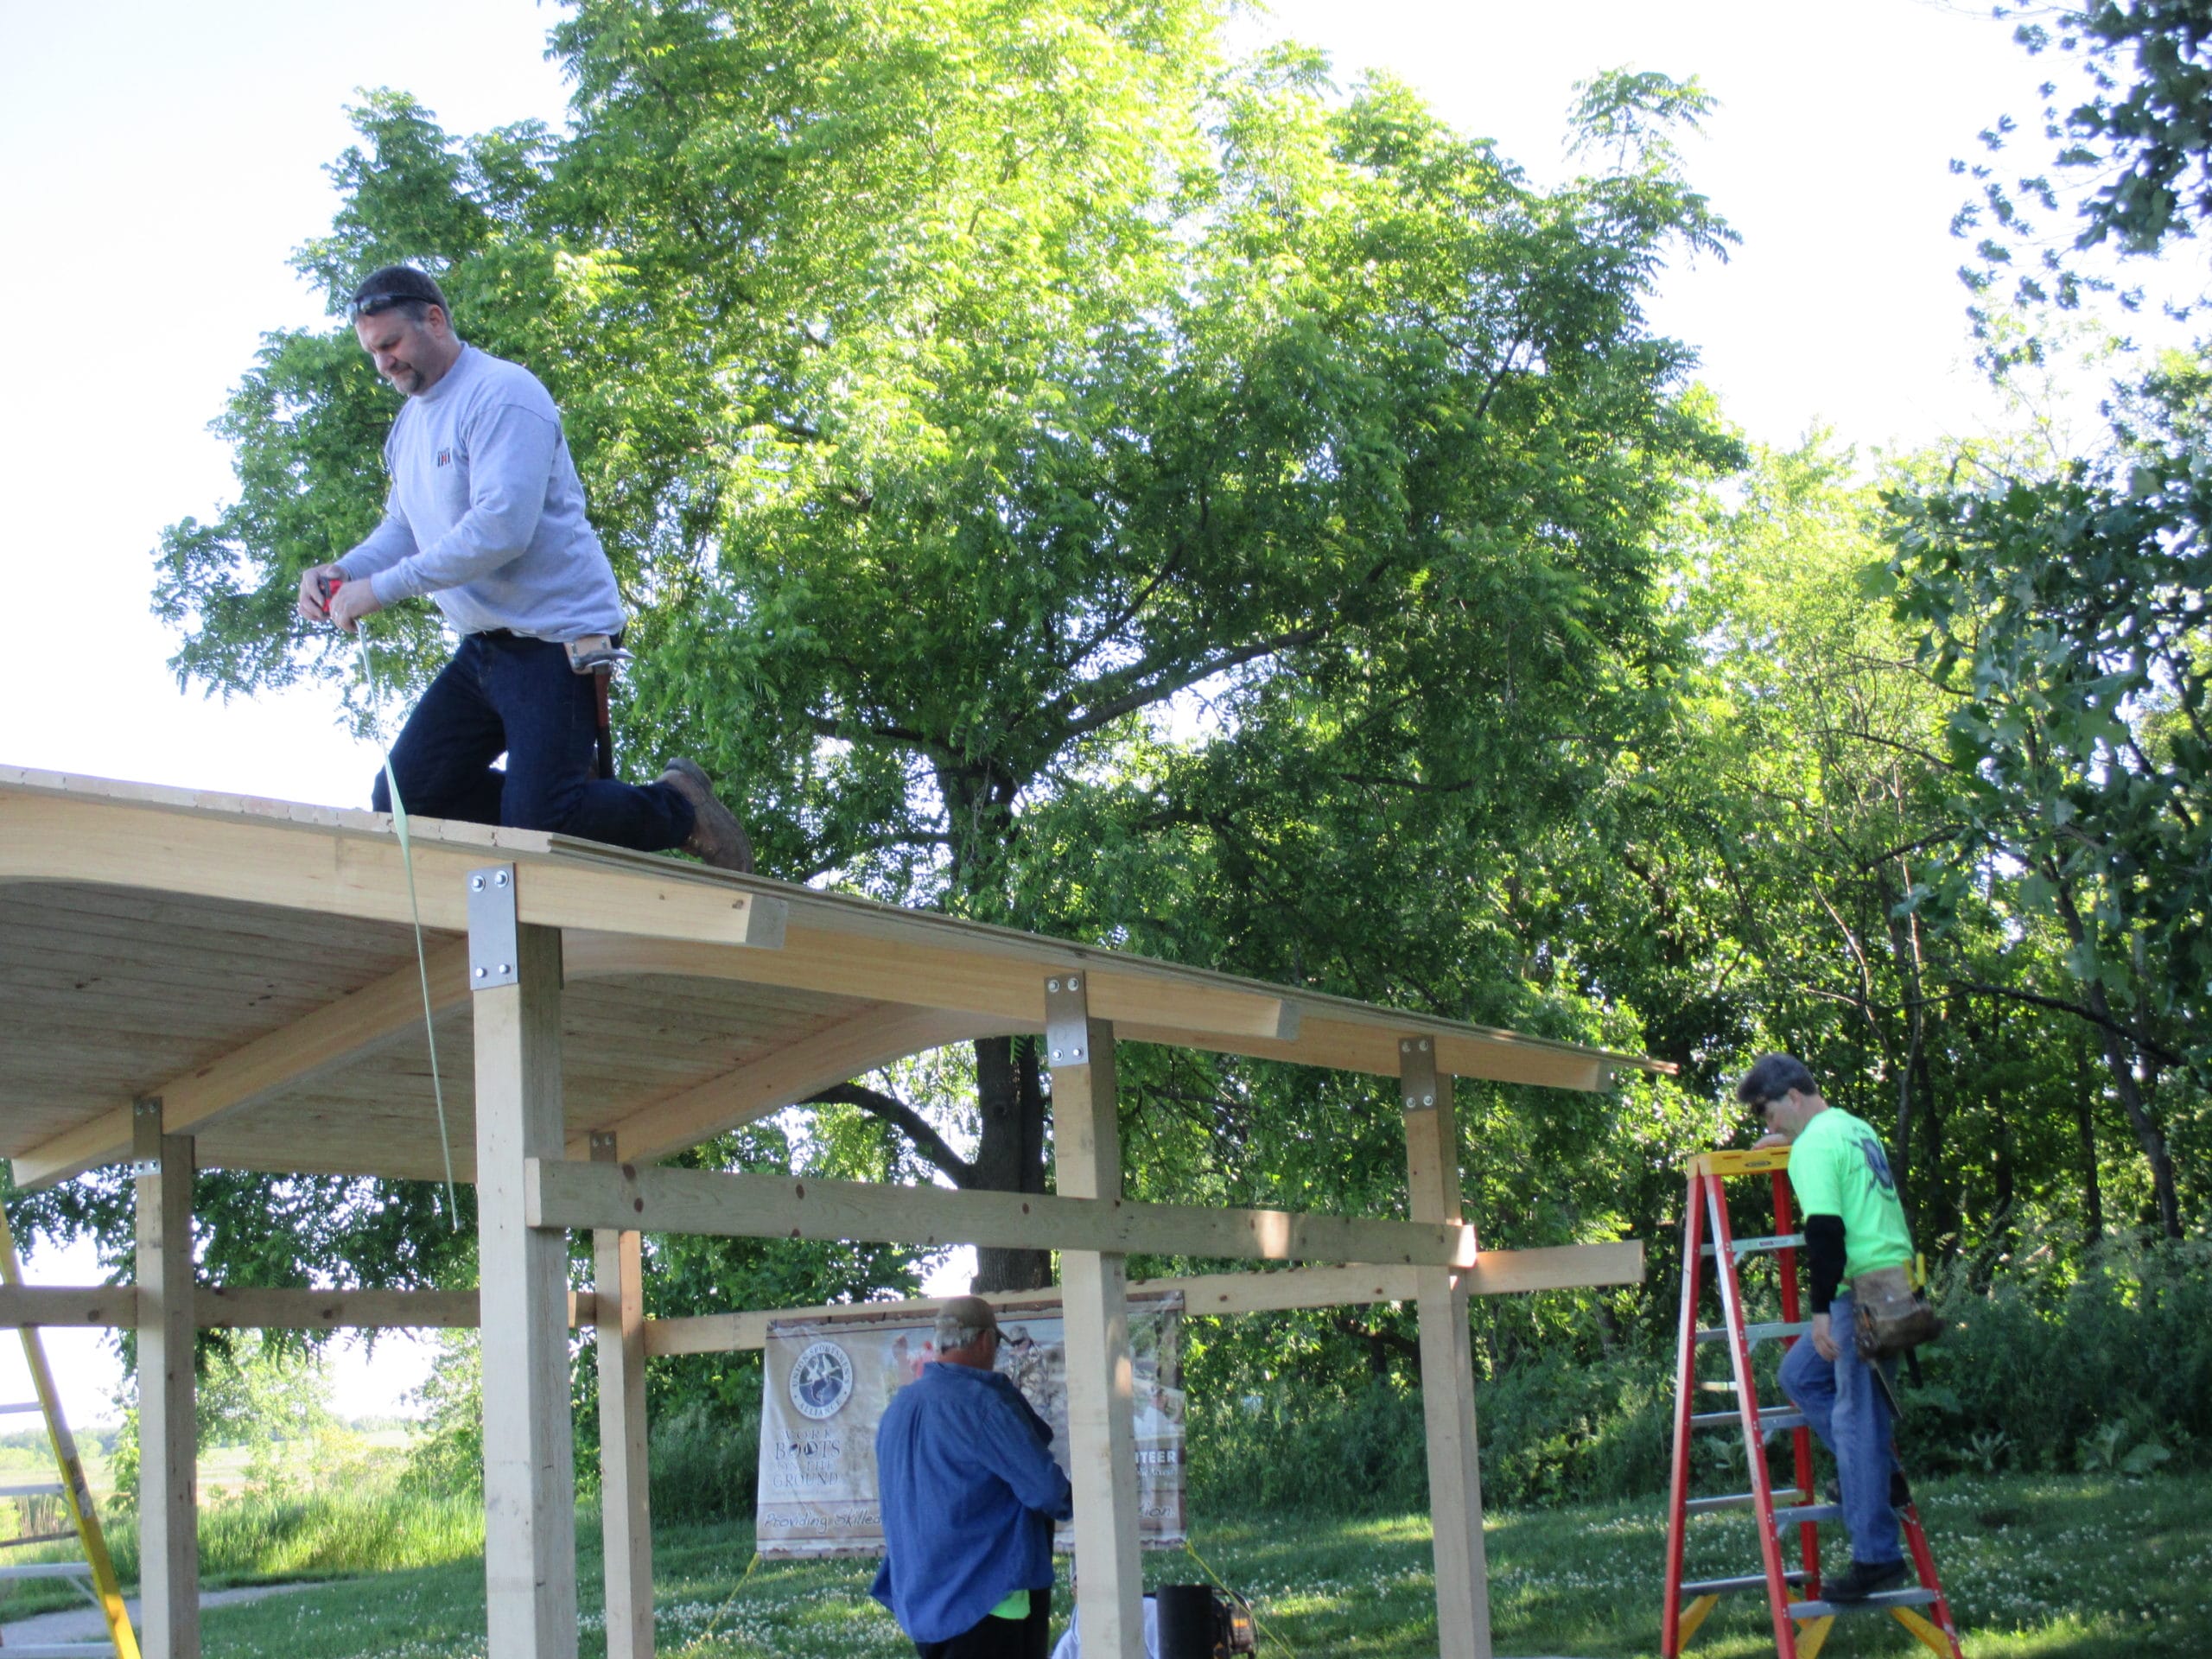 Union volunteers spent the day building a roof on a picnic pavilion, to help shelter visitors, along The Egret Trail at Horicon Marsh, in Mayville, Wisconsin.